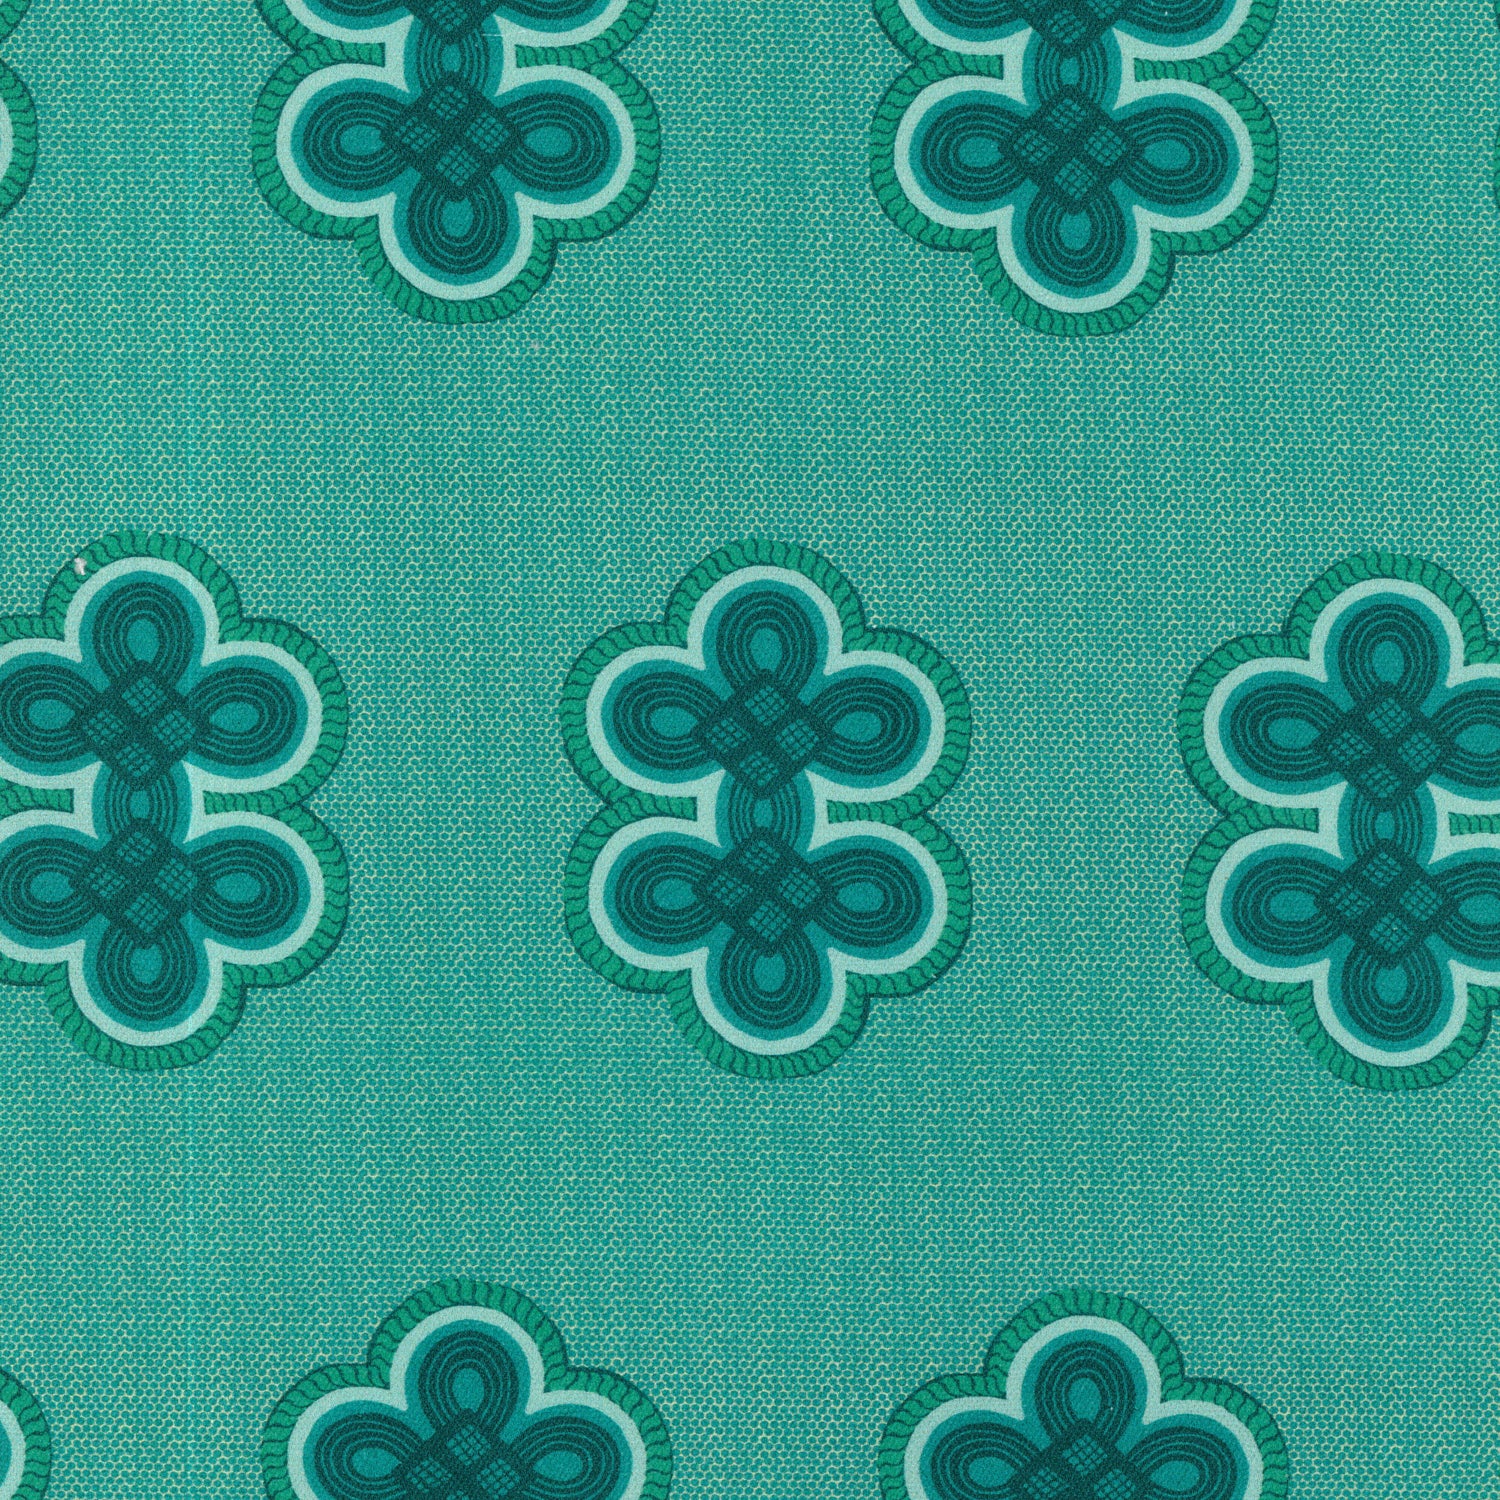 Detail of fabric in a repeating curvilinear knot print in blue and turquoise on a turquoise field.